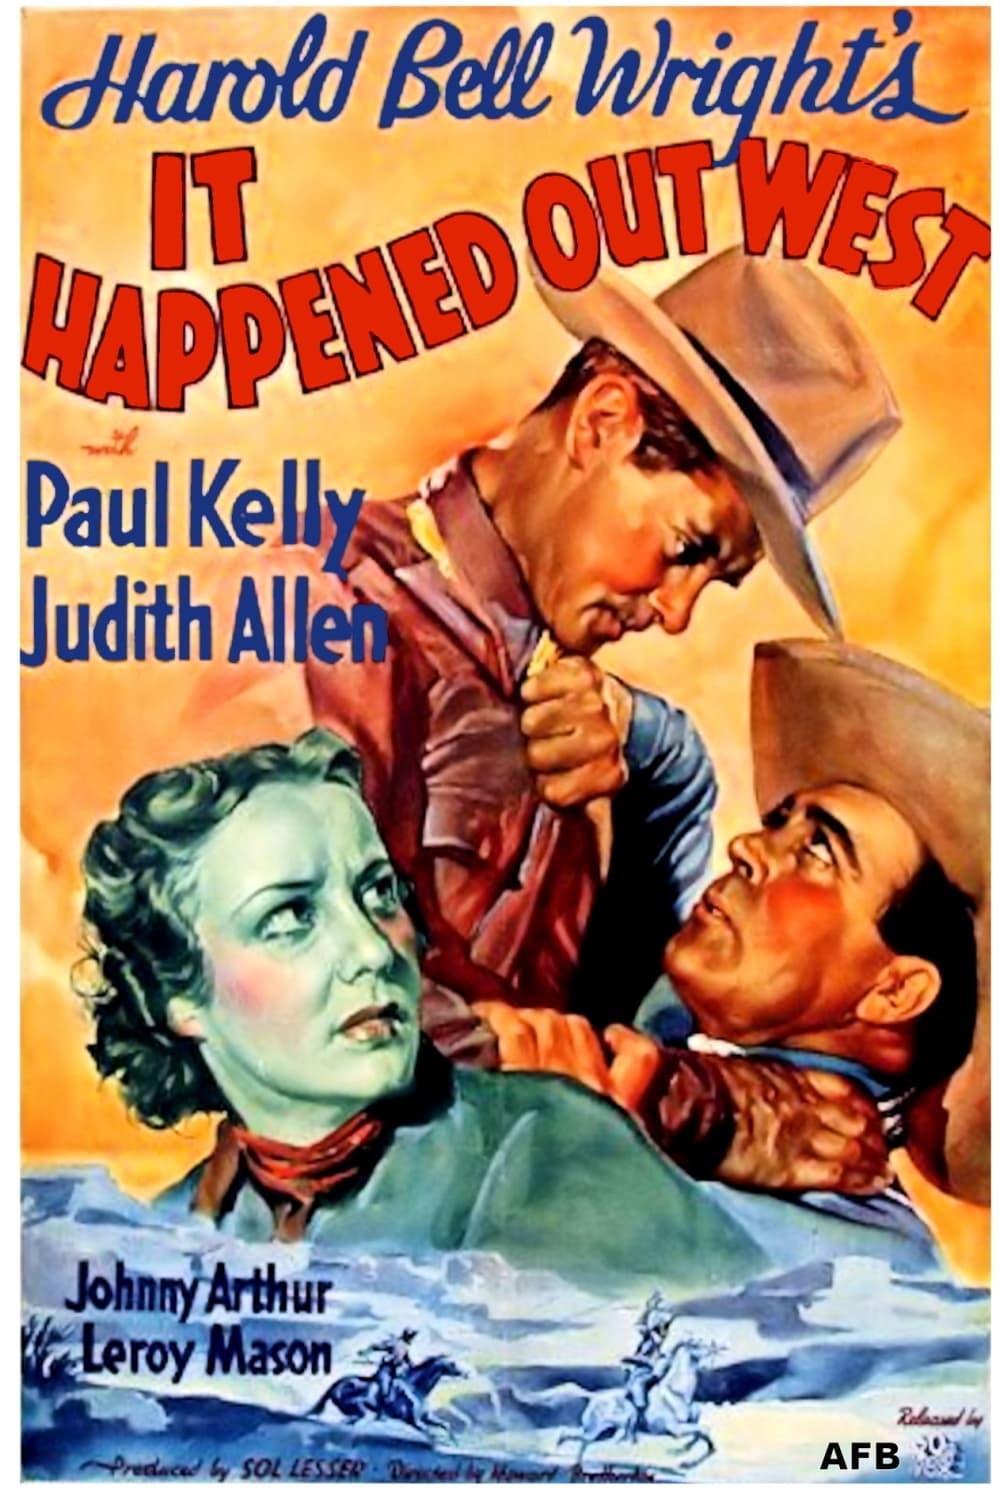 It Happened Out West poster